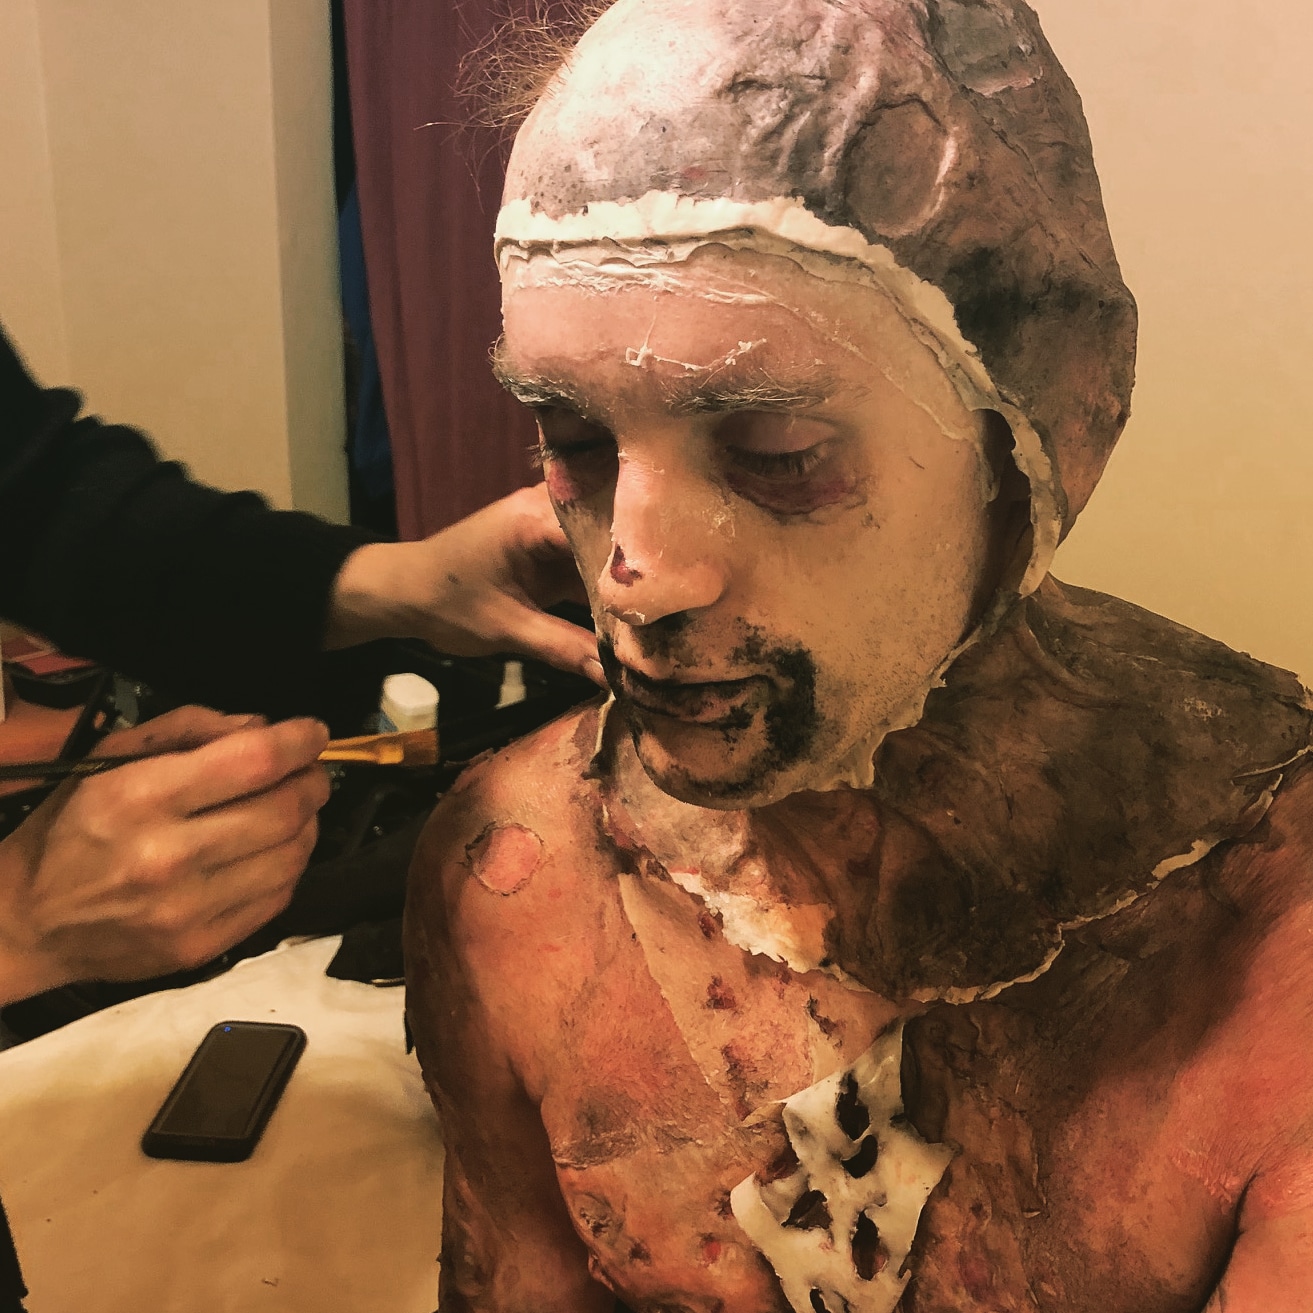  The make-up comes off after the second monster day on the set of "Making Monsters" 